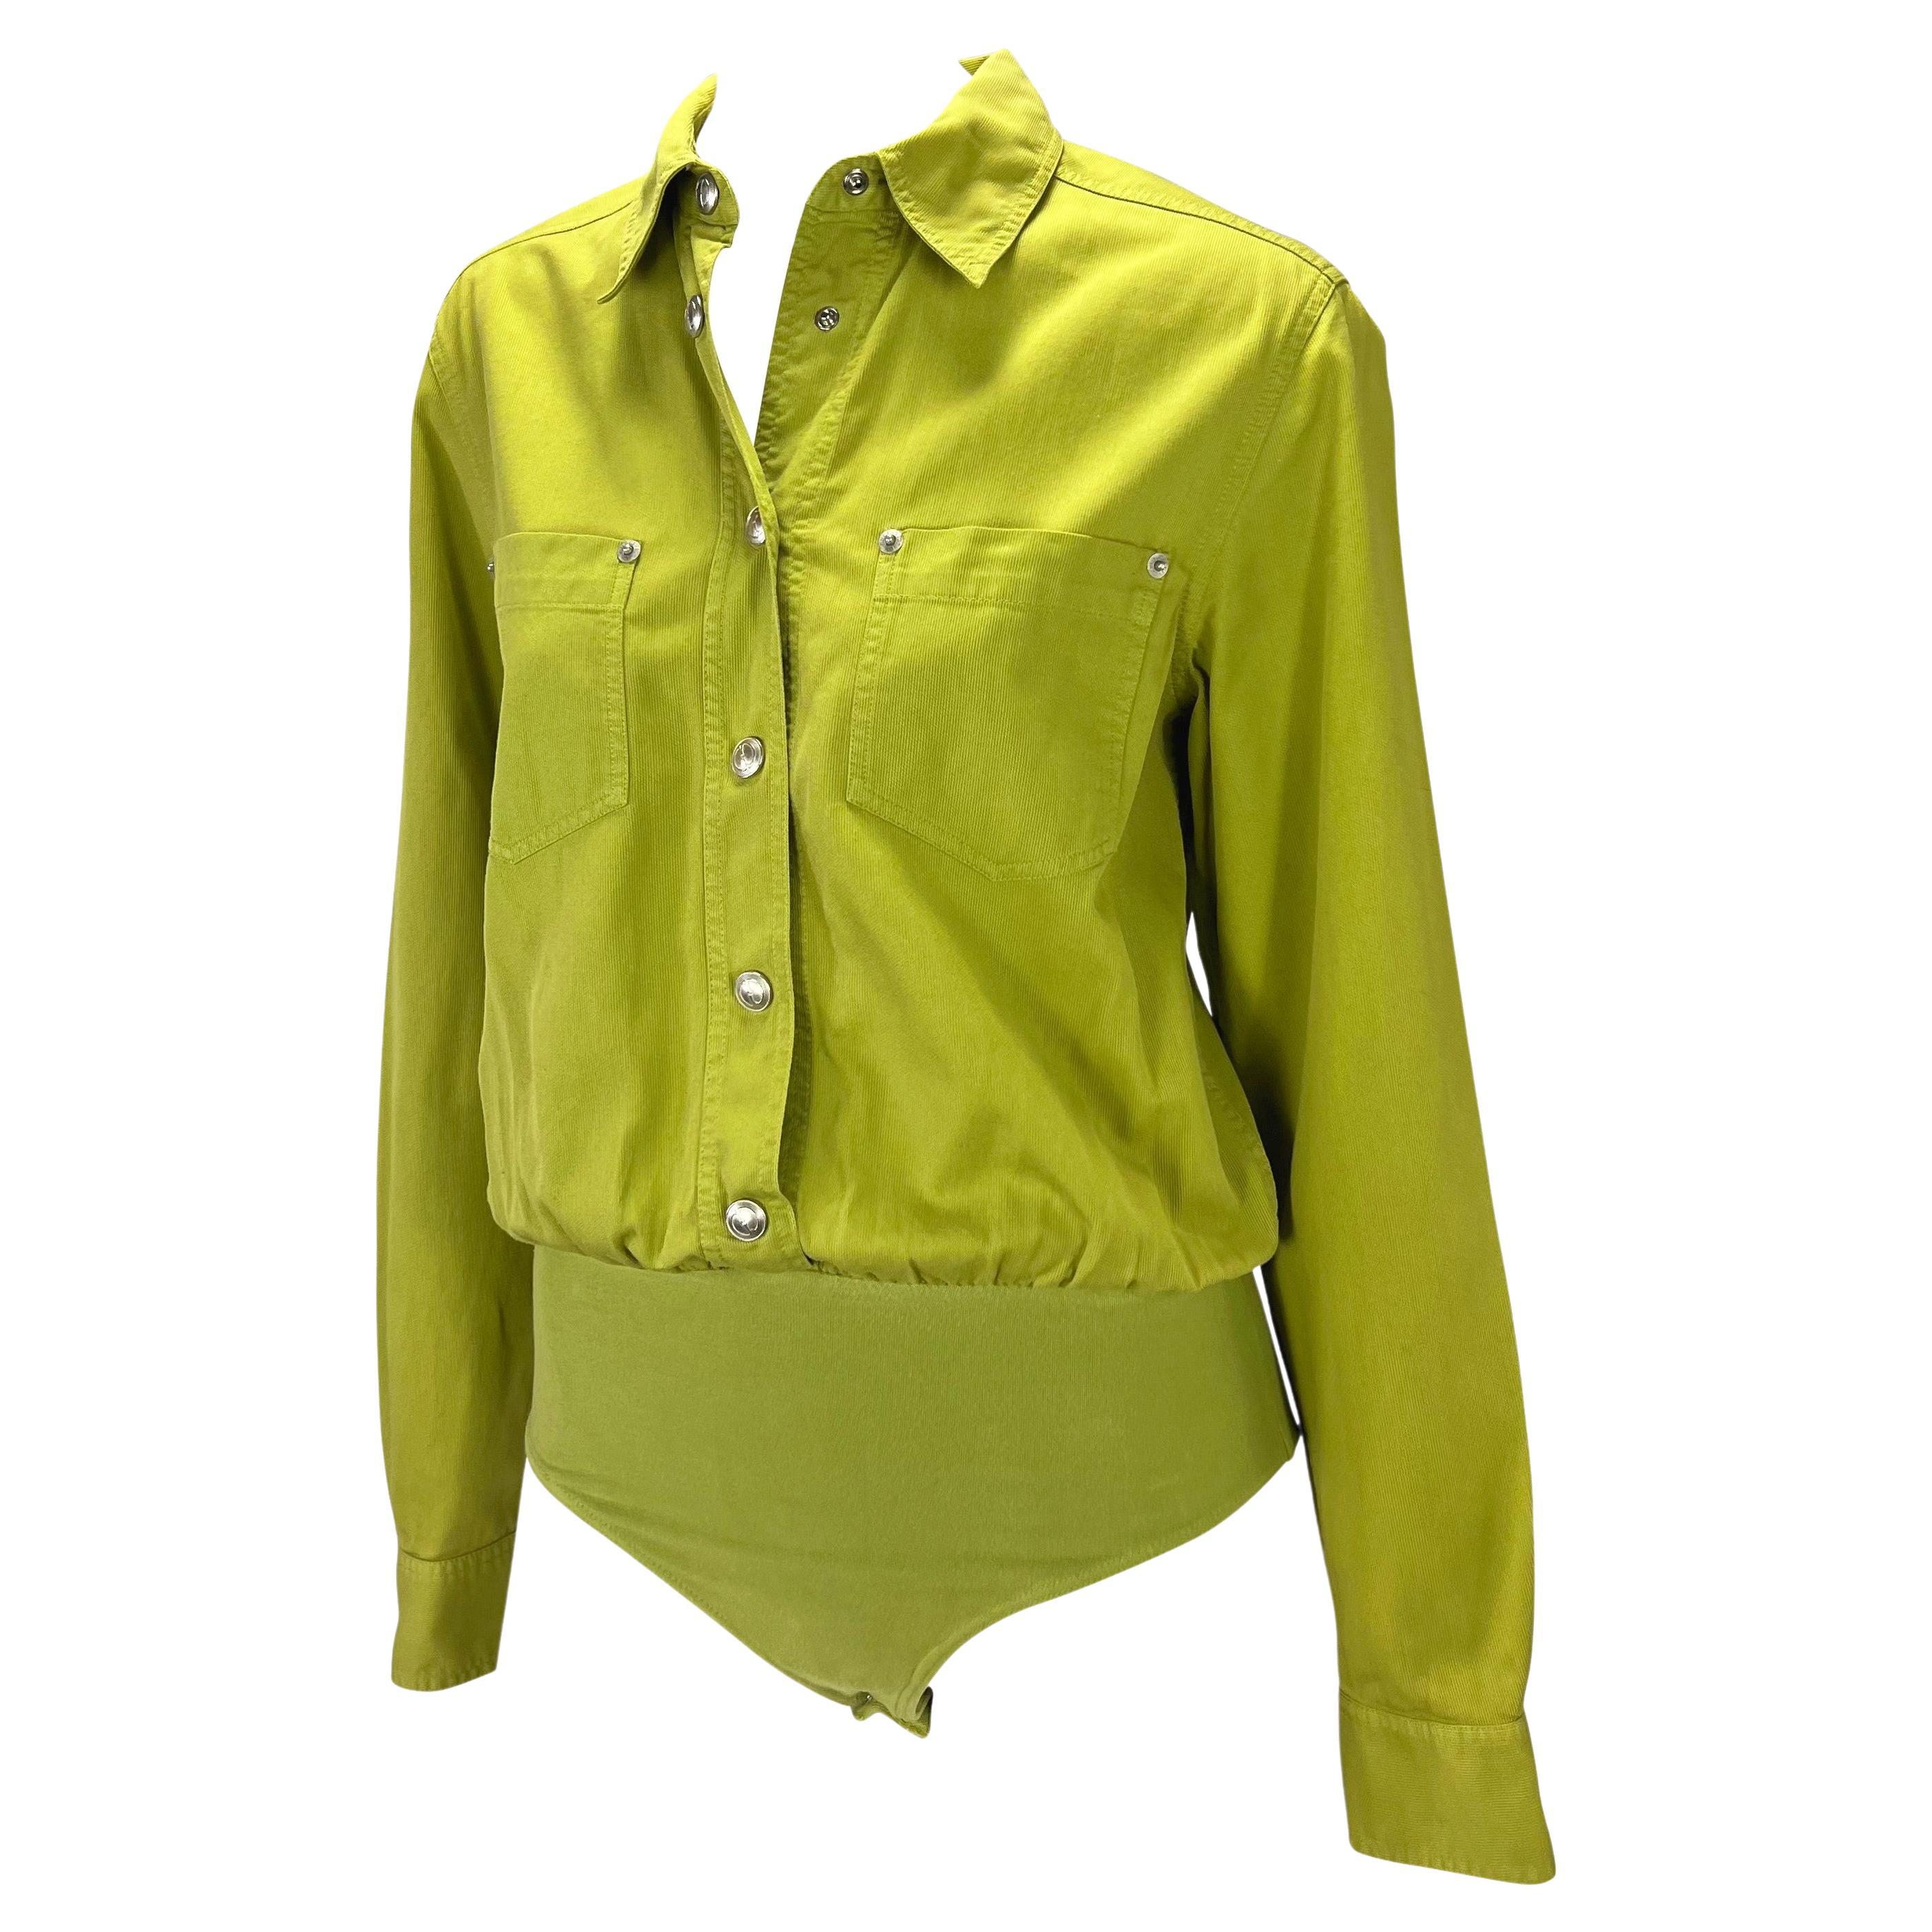 Presenting a chartreuse Gucci leotard top, designed by Tom Ford. From the Spring/Summer 1995 collection, this top features a classic button-down shirt style elevated with two pockets at the bust and silver 'GG' button snap closures throughout. The